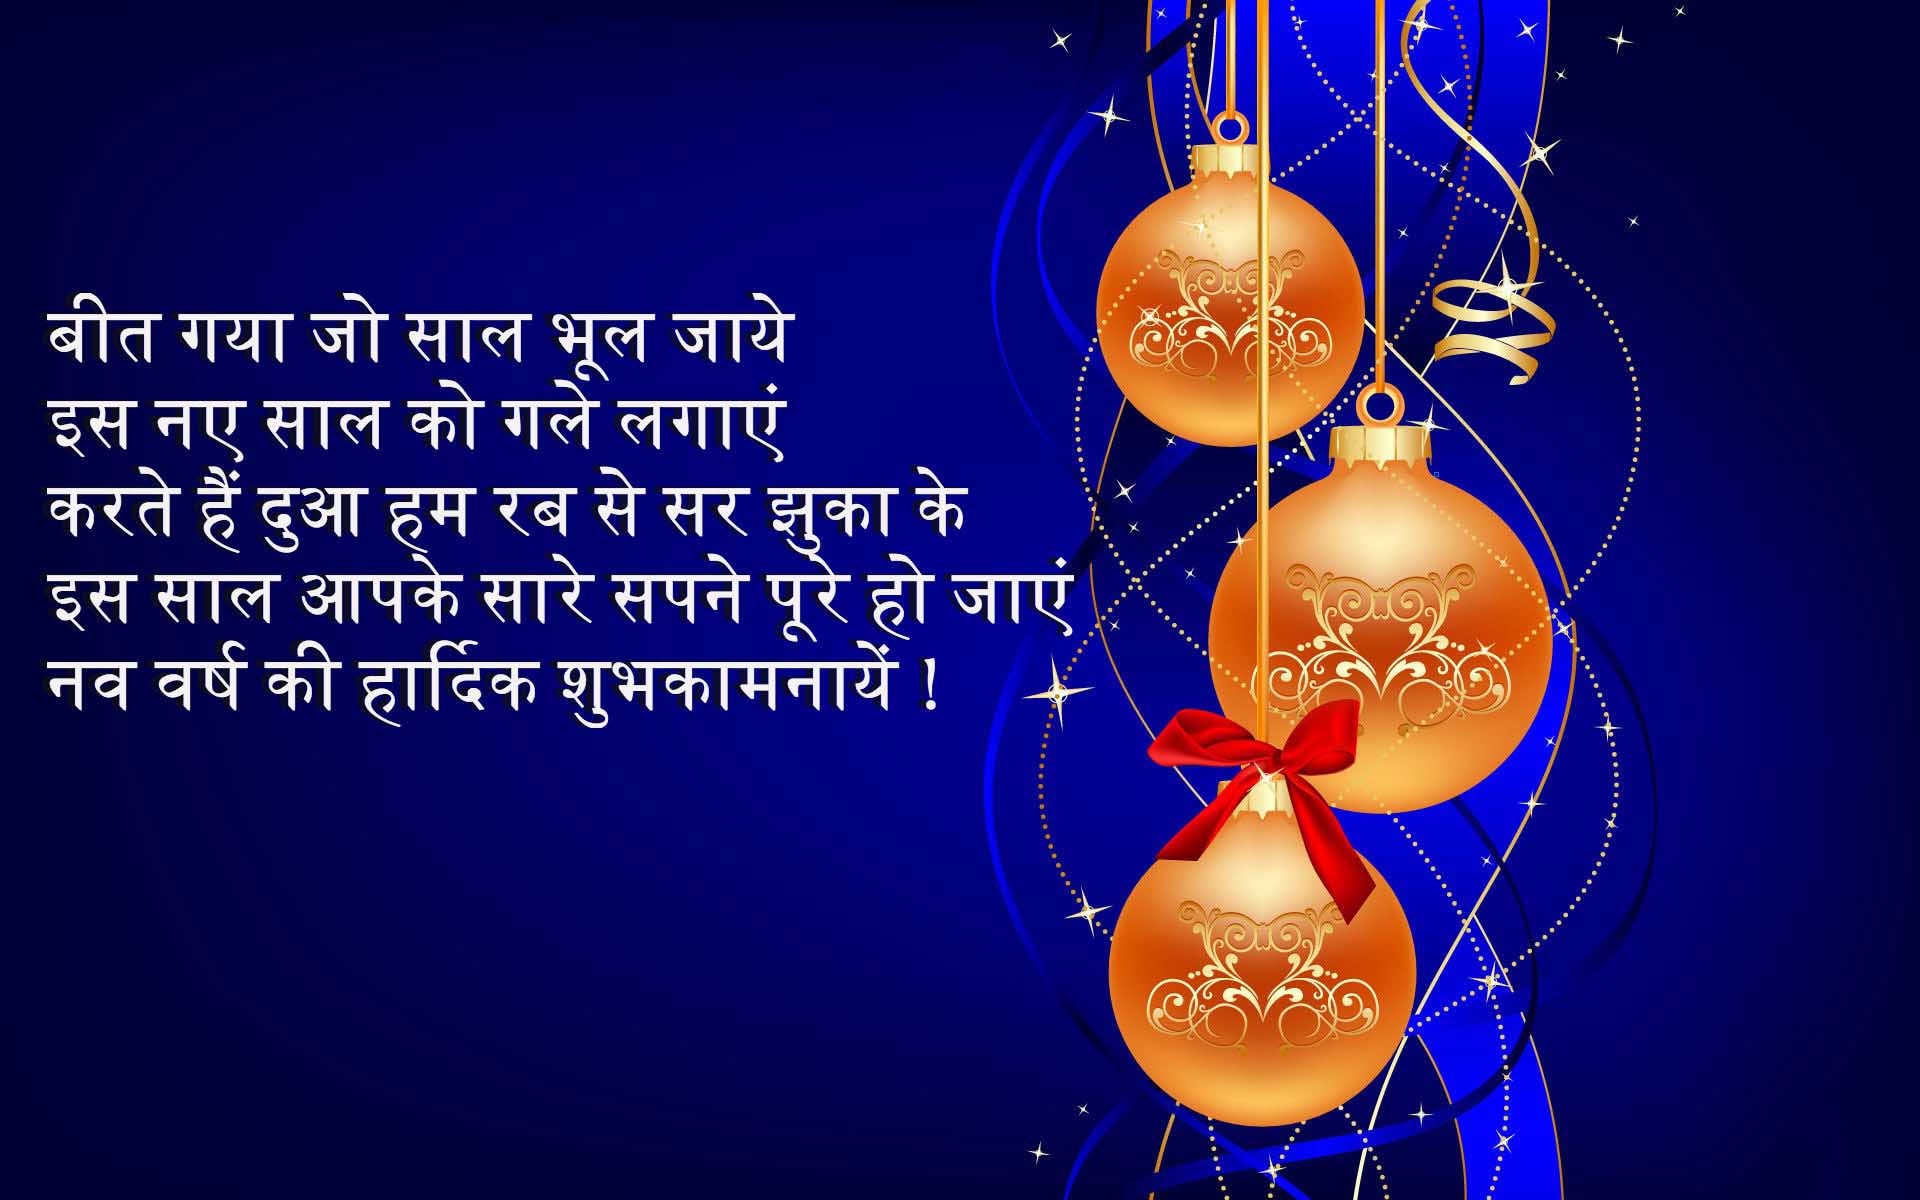 best quotes for happy new year in hindi